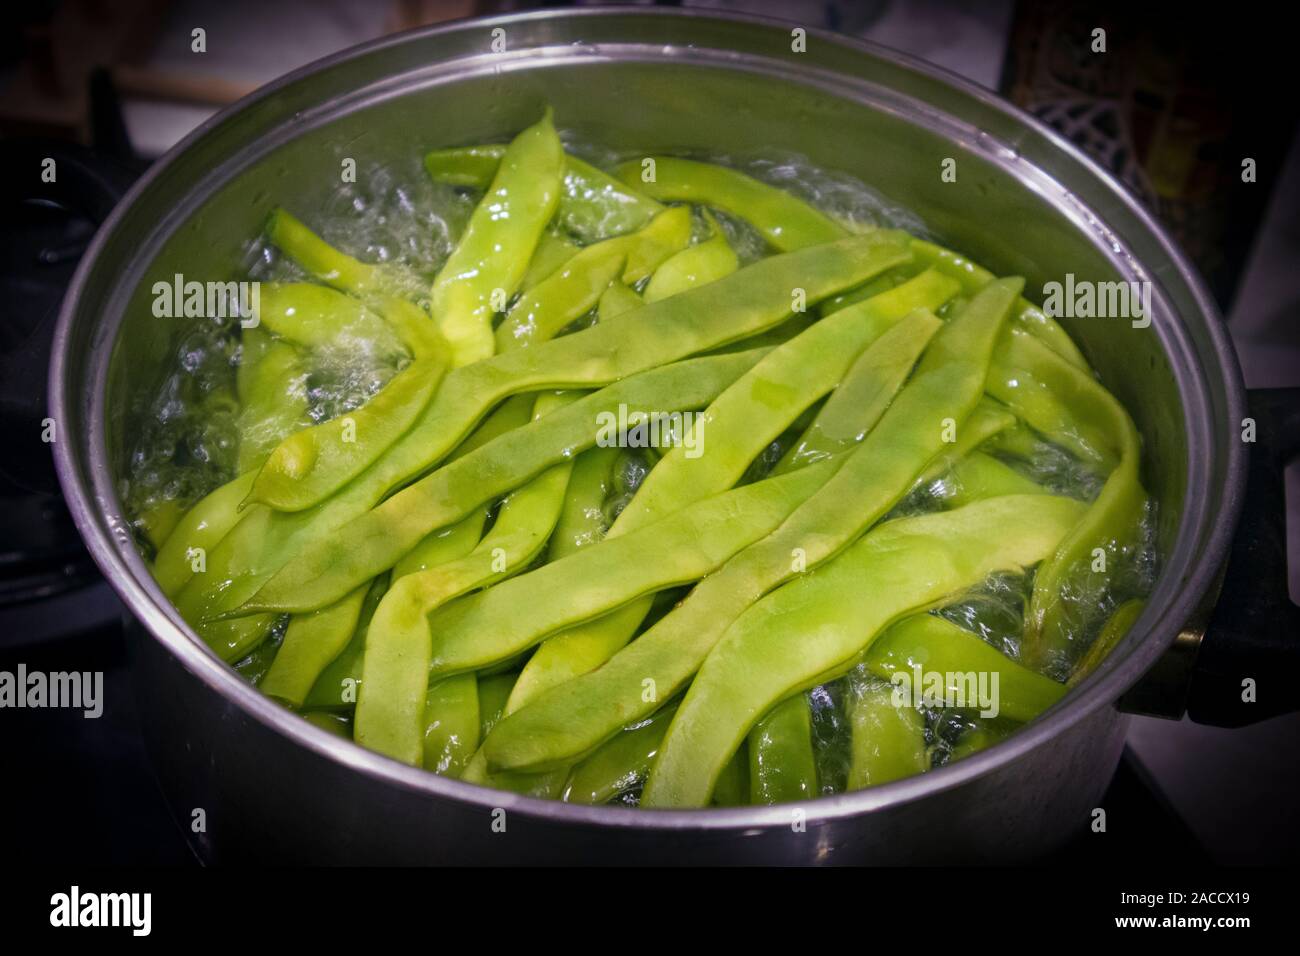 The top of large metal pan with boiling green bean pods inside Stock Photo